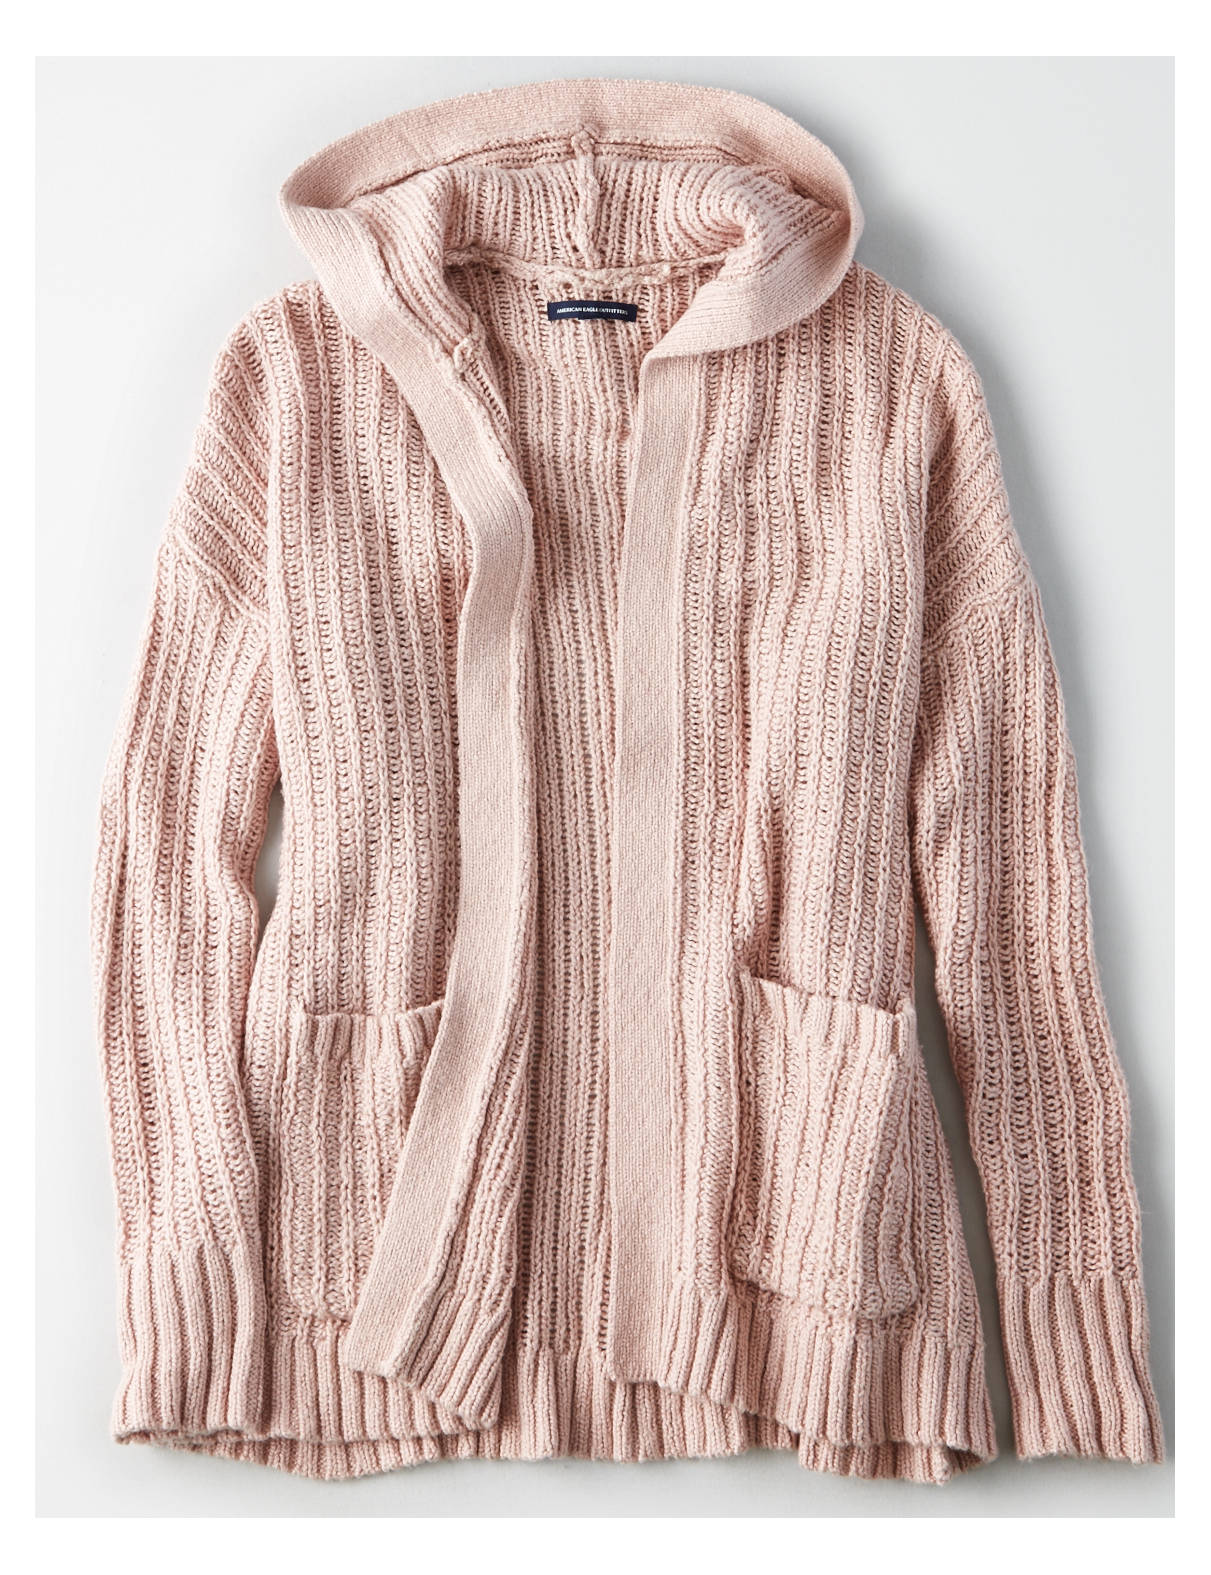 Sweaters for Women | American Eagle Outfitters